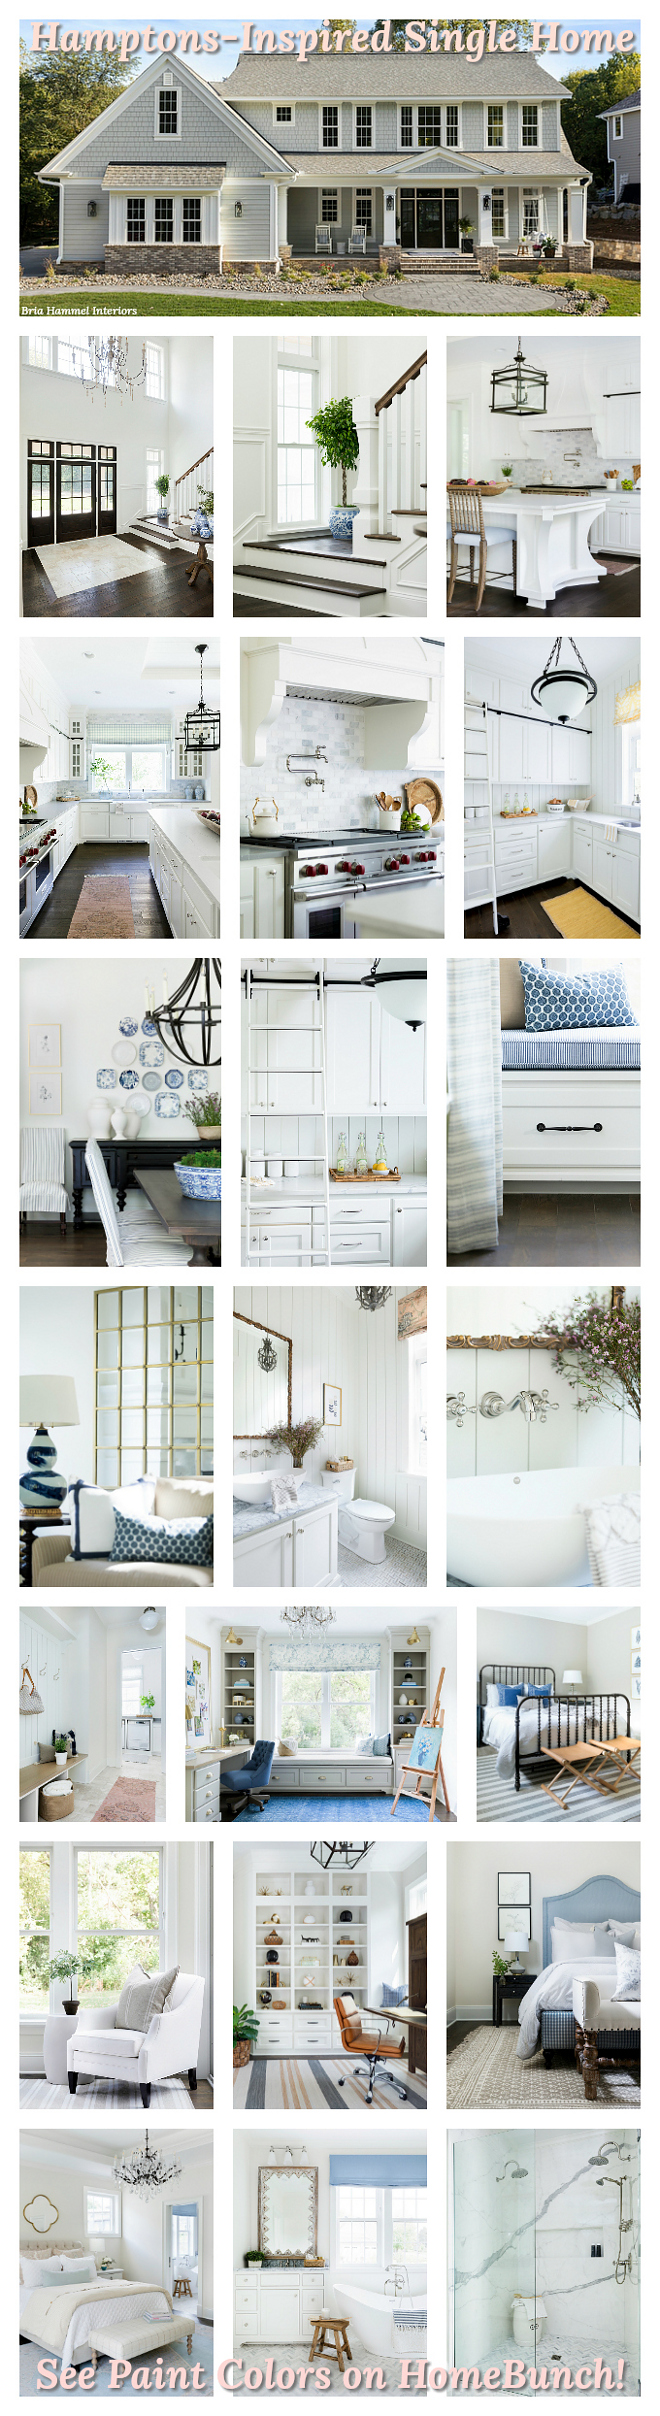 Hamptons-Inspired Single Home Hamptons-Inspired Single Home Photos and Paint Colors